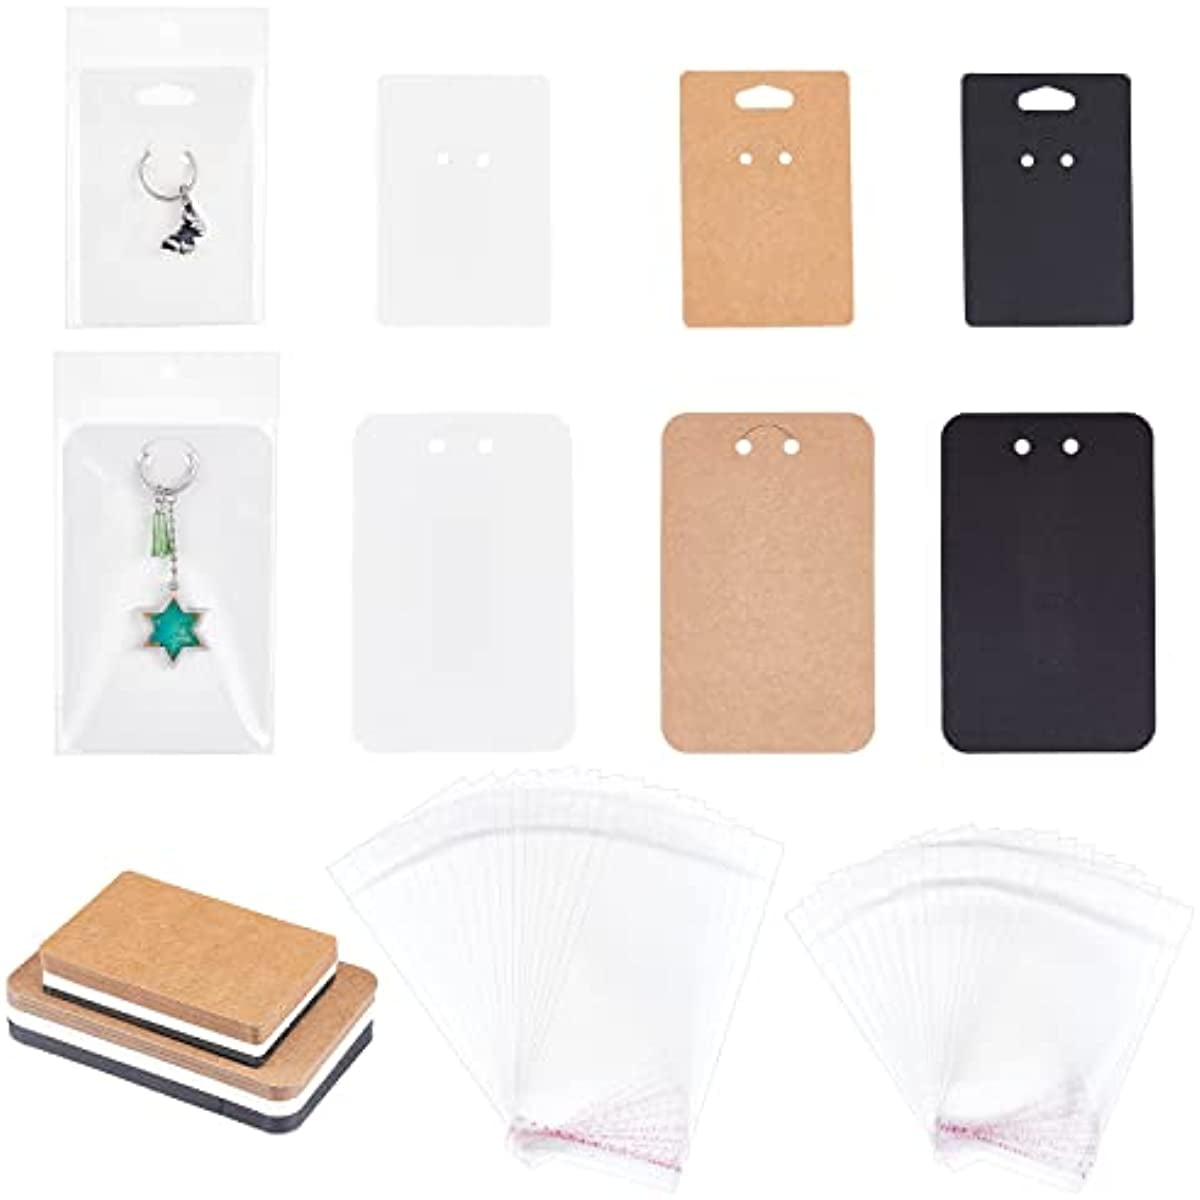 ZYNERY 100 PCS Keychain Display Cards, 3 x 4.7 Inch Keychain Holder with  Self-Sealing Bags, Card Display Rack for Displaying Keyring Jewelry Bulk